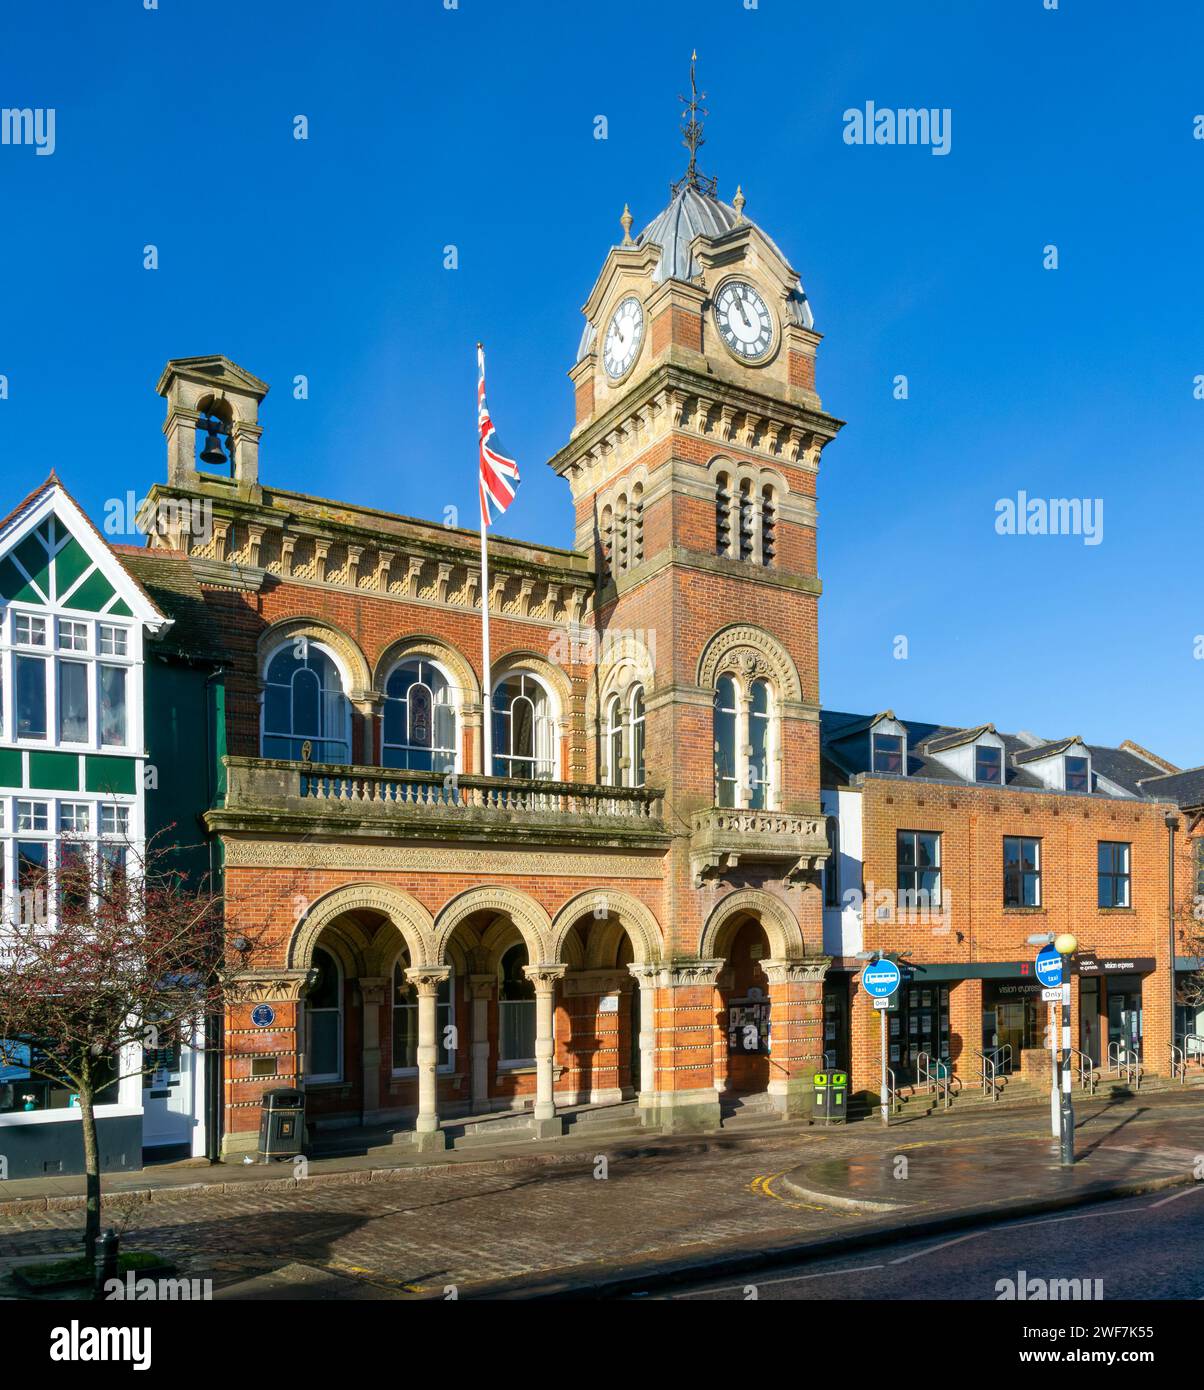 Clock tower of Town Hall, Hungerford, Berkshire, England, UK built 1871 Stock Photo